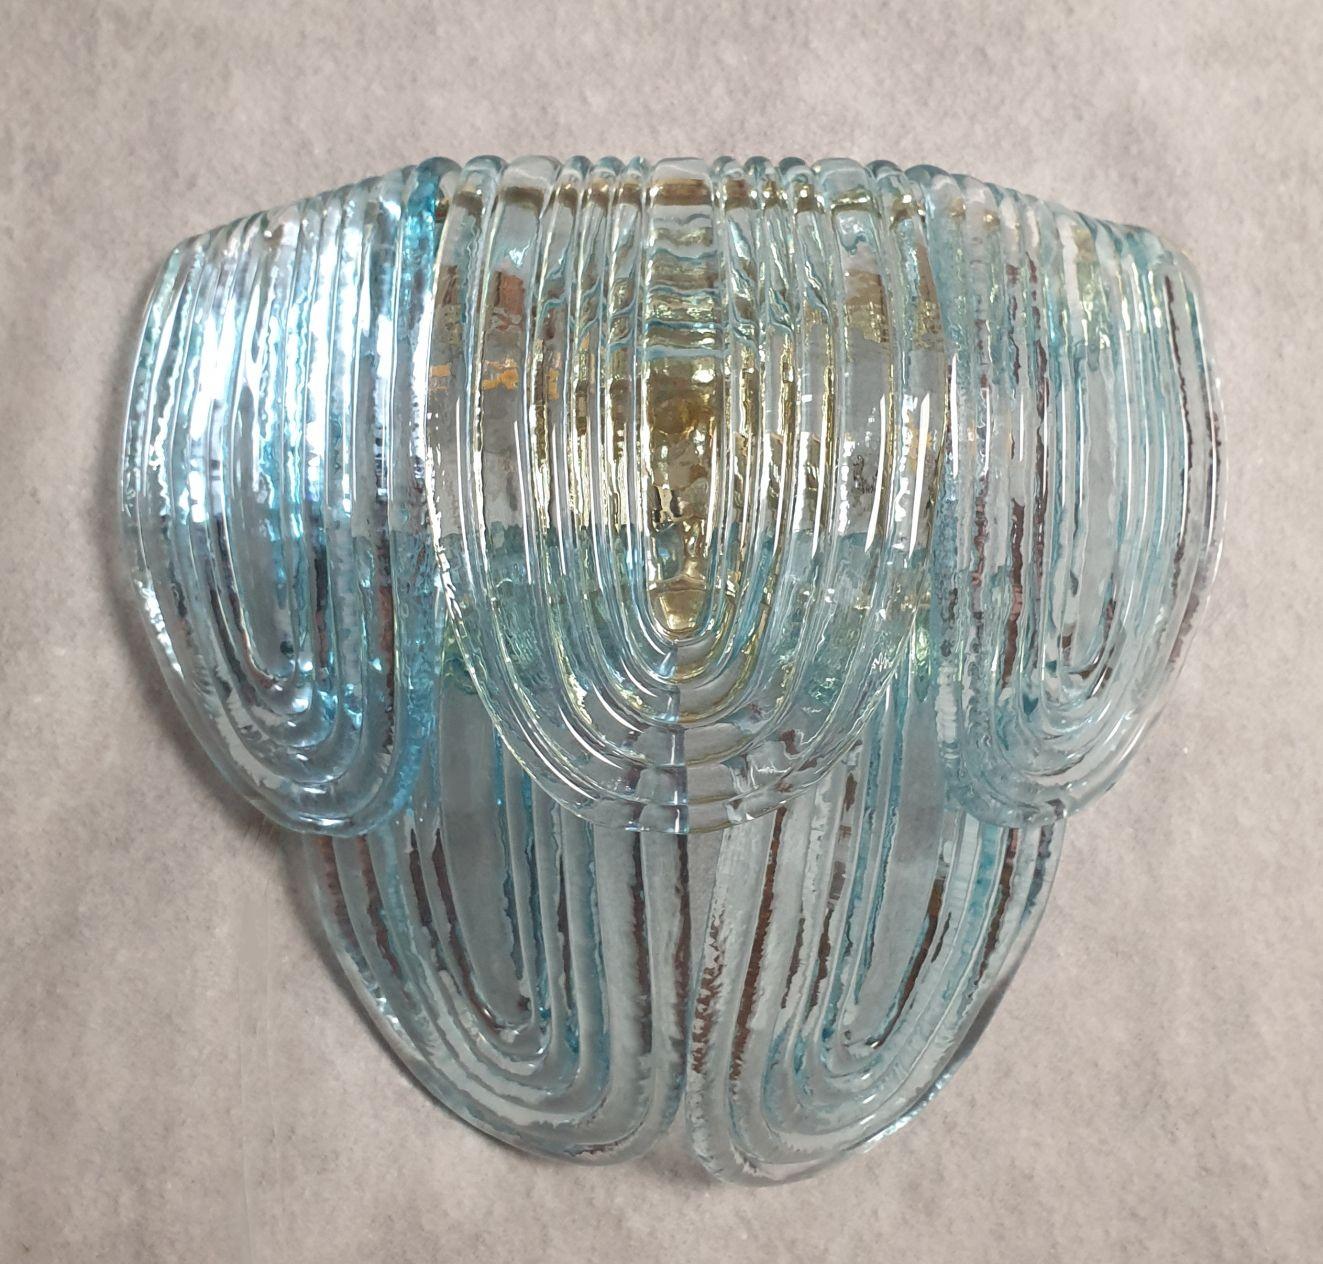 Mid-Century Modern pair of Murano glass sconces, attributed to Mazzega, Italy, 1980s.
The Italian sconces have a neoclassical style, and are very elegant.
The pair of sconces is made of translucent light blue Murano glass and a gold plated